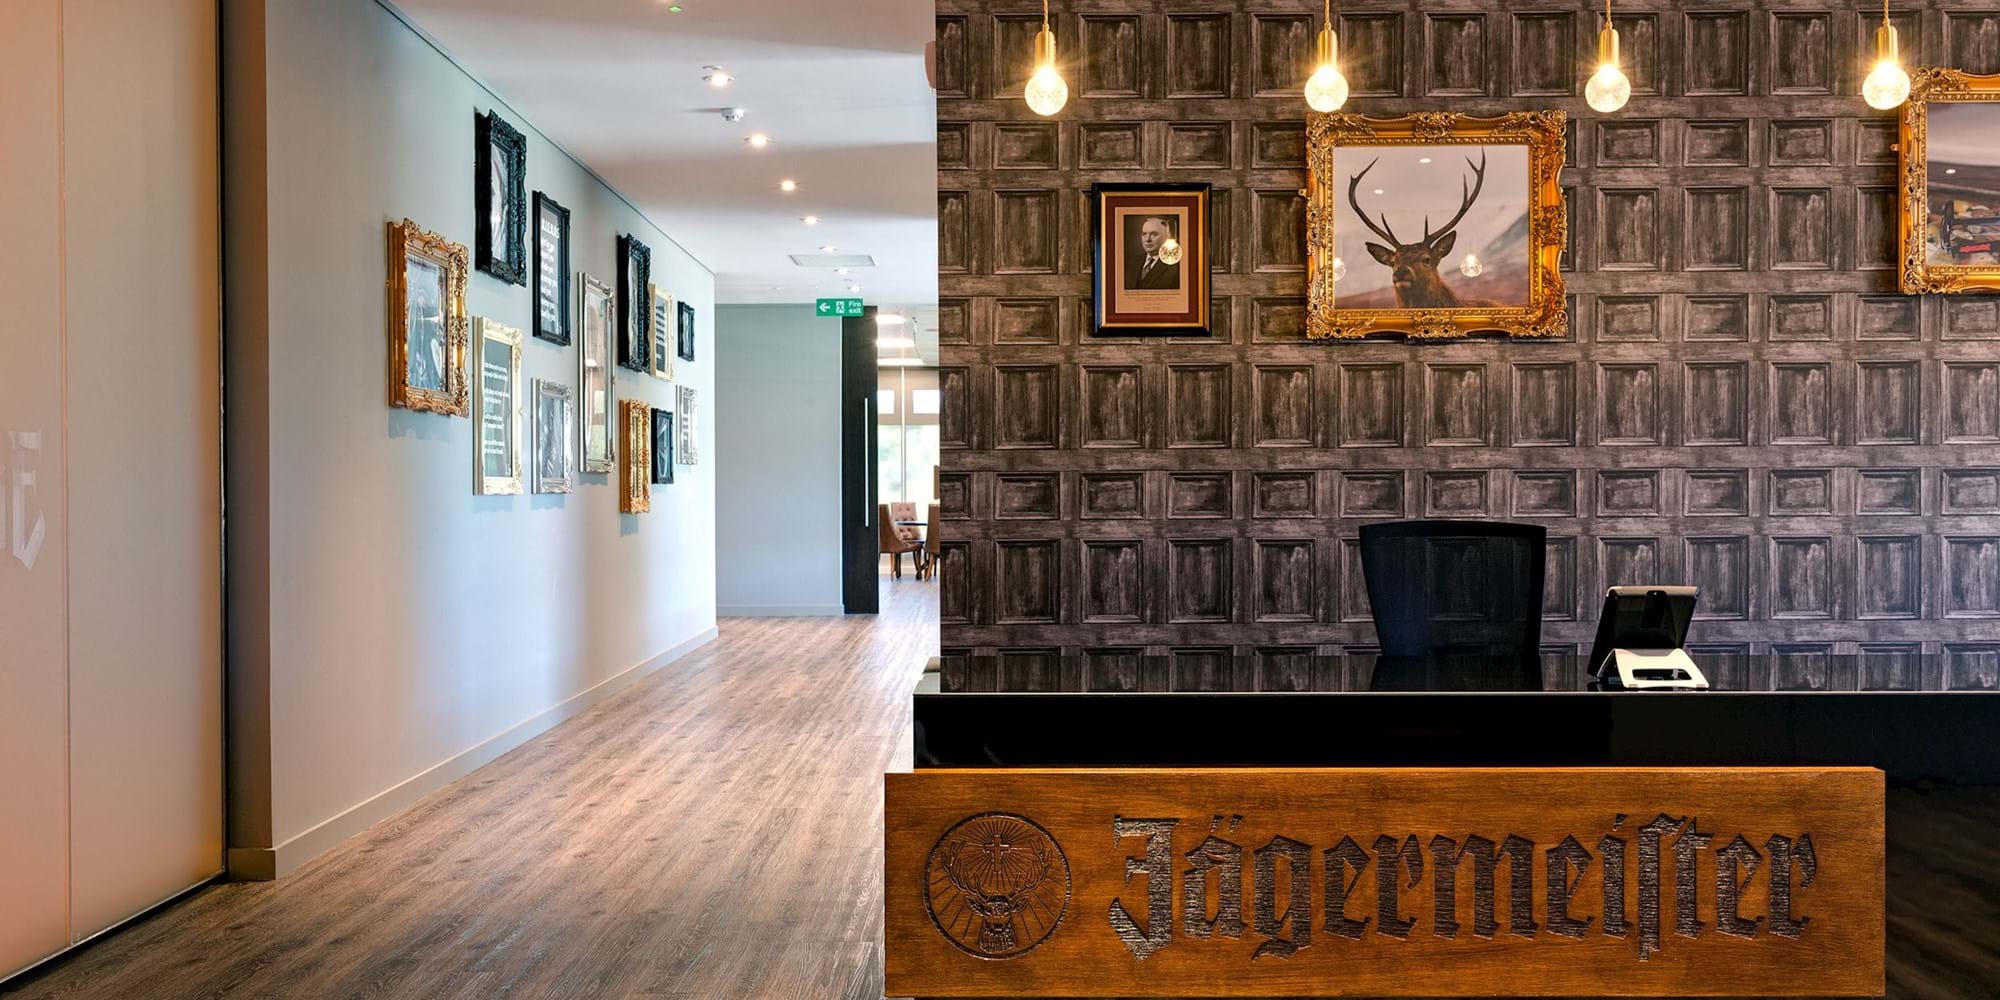 Modus Workspace office design, fit out and refurbishment - Jagermeister - Reception - Jagermeister 02 d highres sRGB.jpg